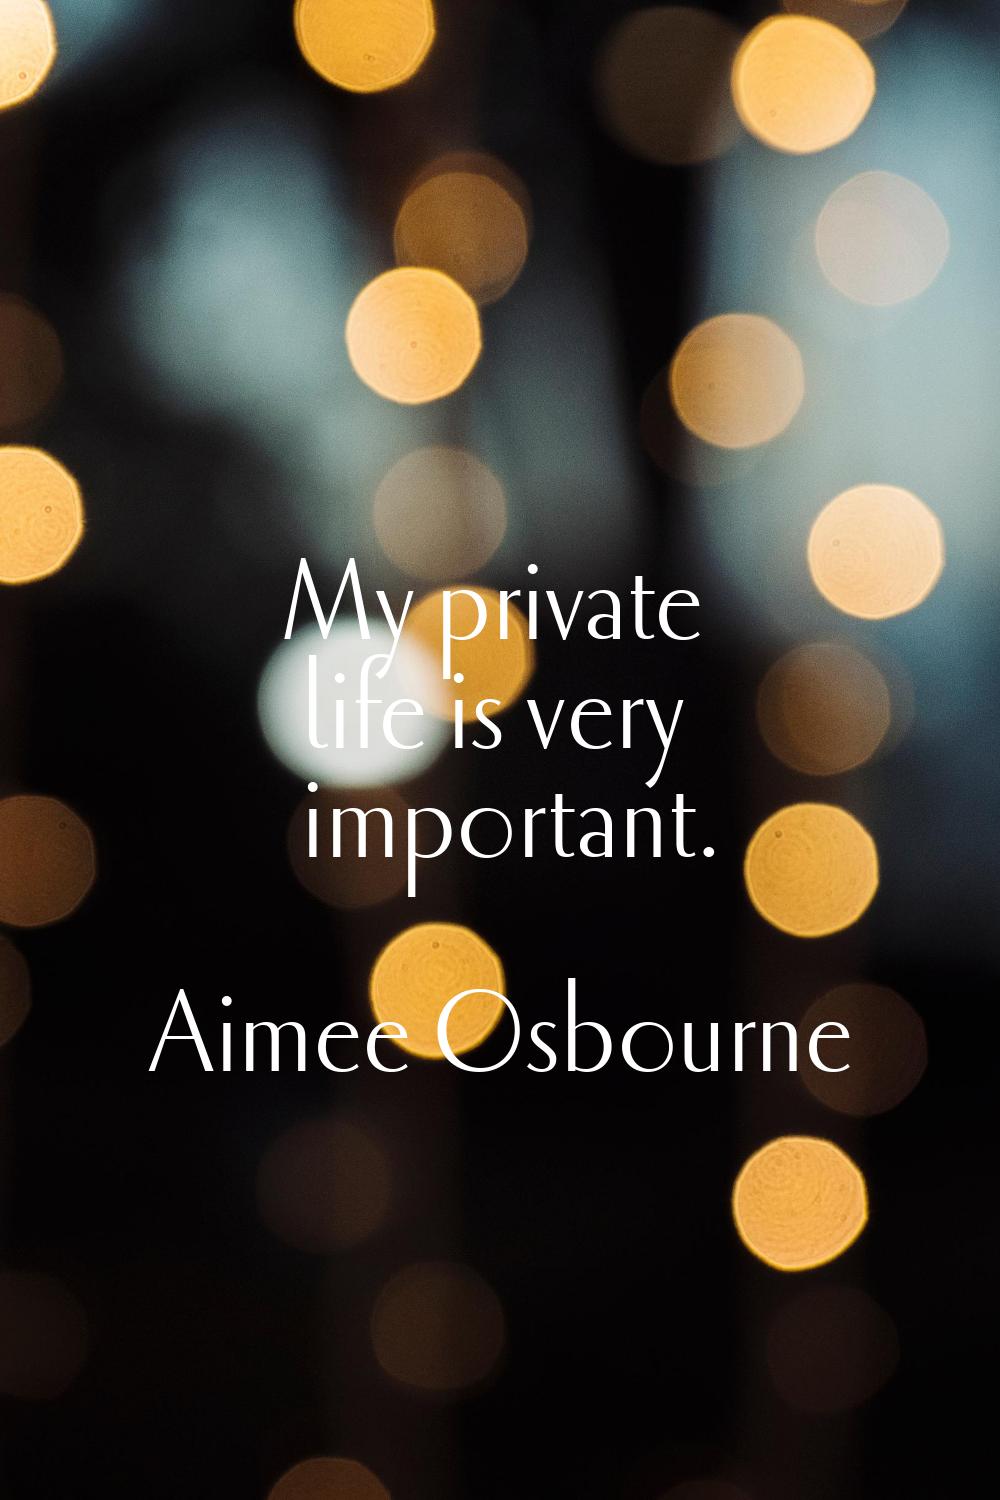 My private life is very important.